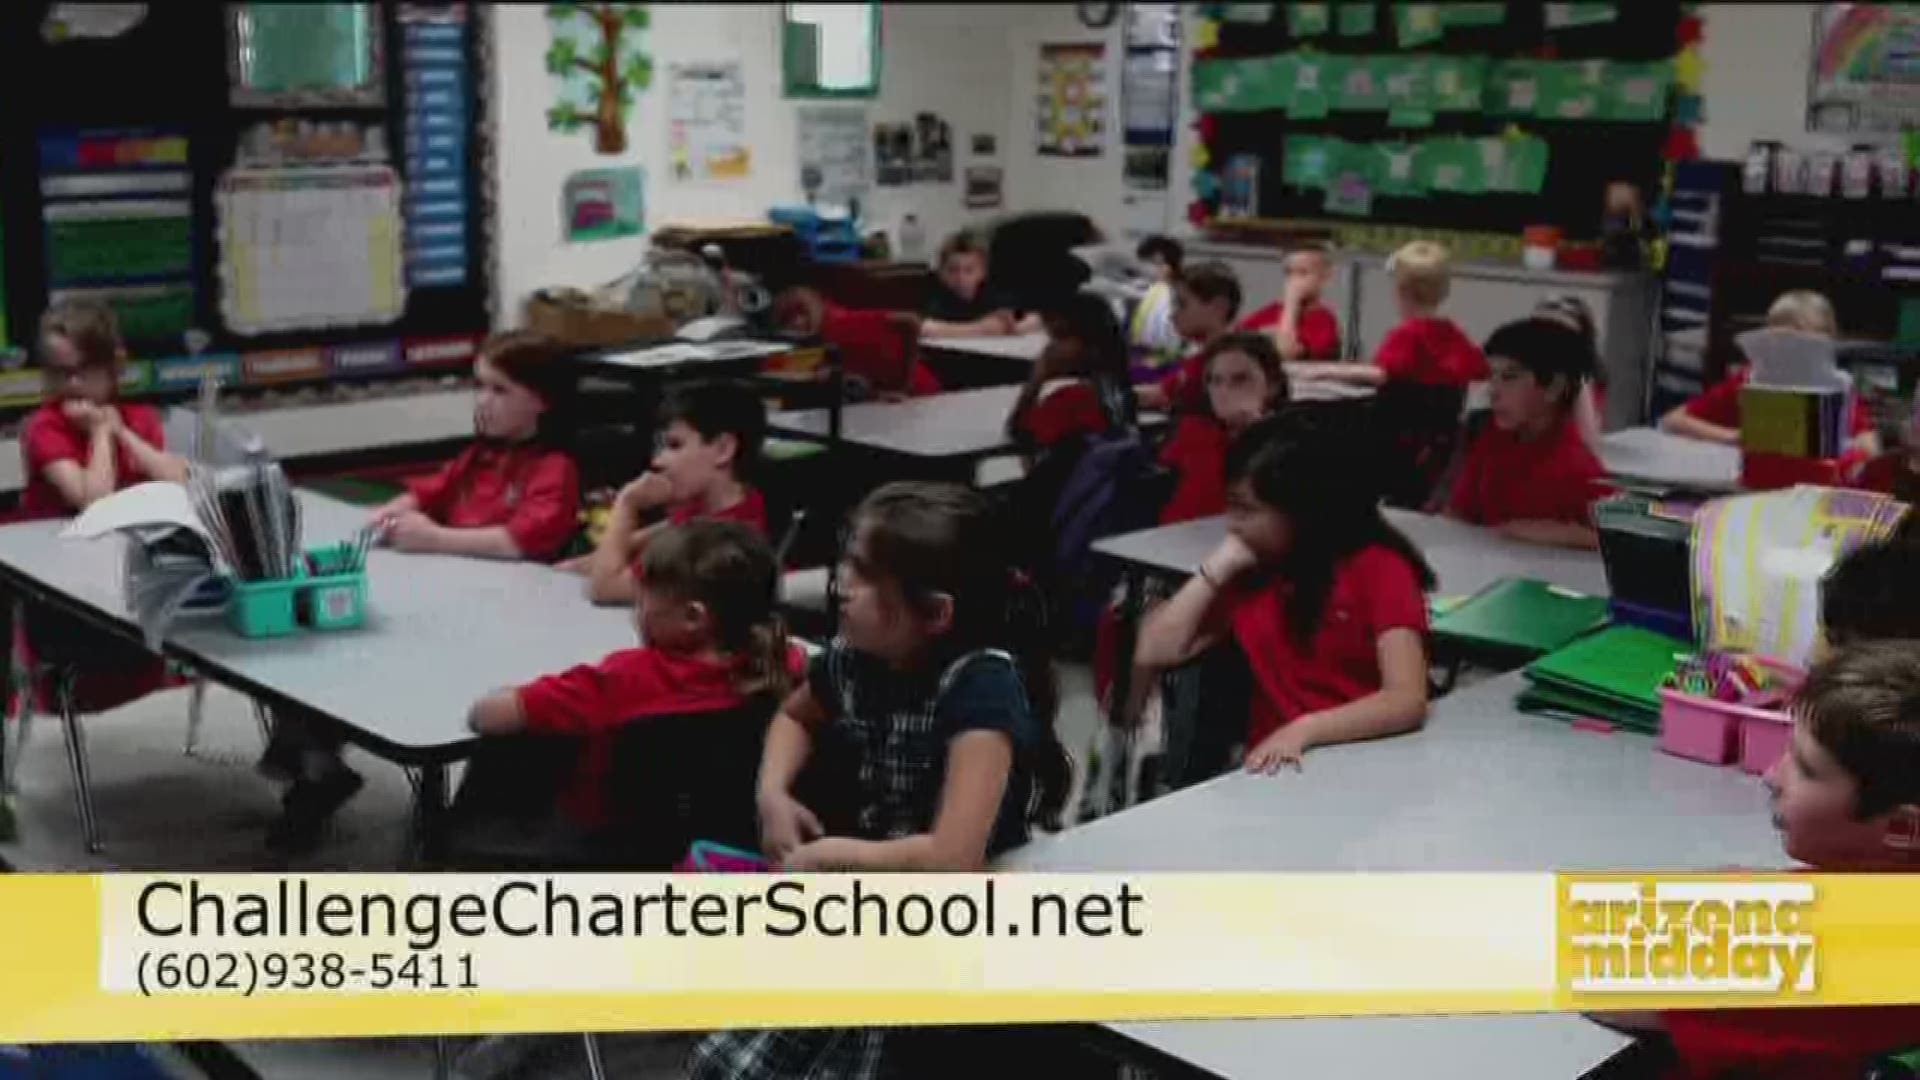 Wendy Miller and Tammy Neitch join us to discuss why Challenge Charter School is known for getting students ahead as a part of Everything Arizona: Everywhere from A to Z.